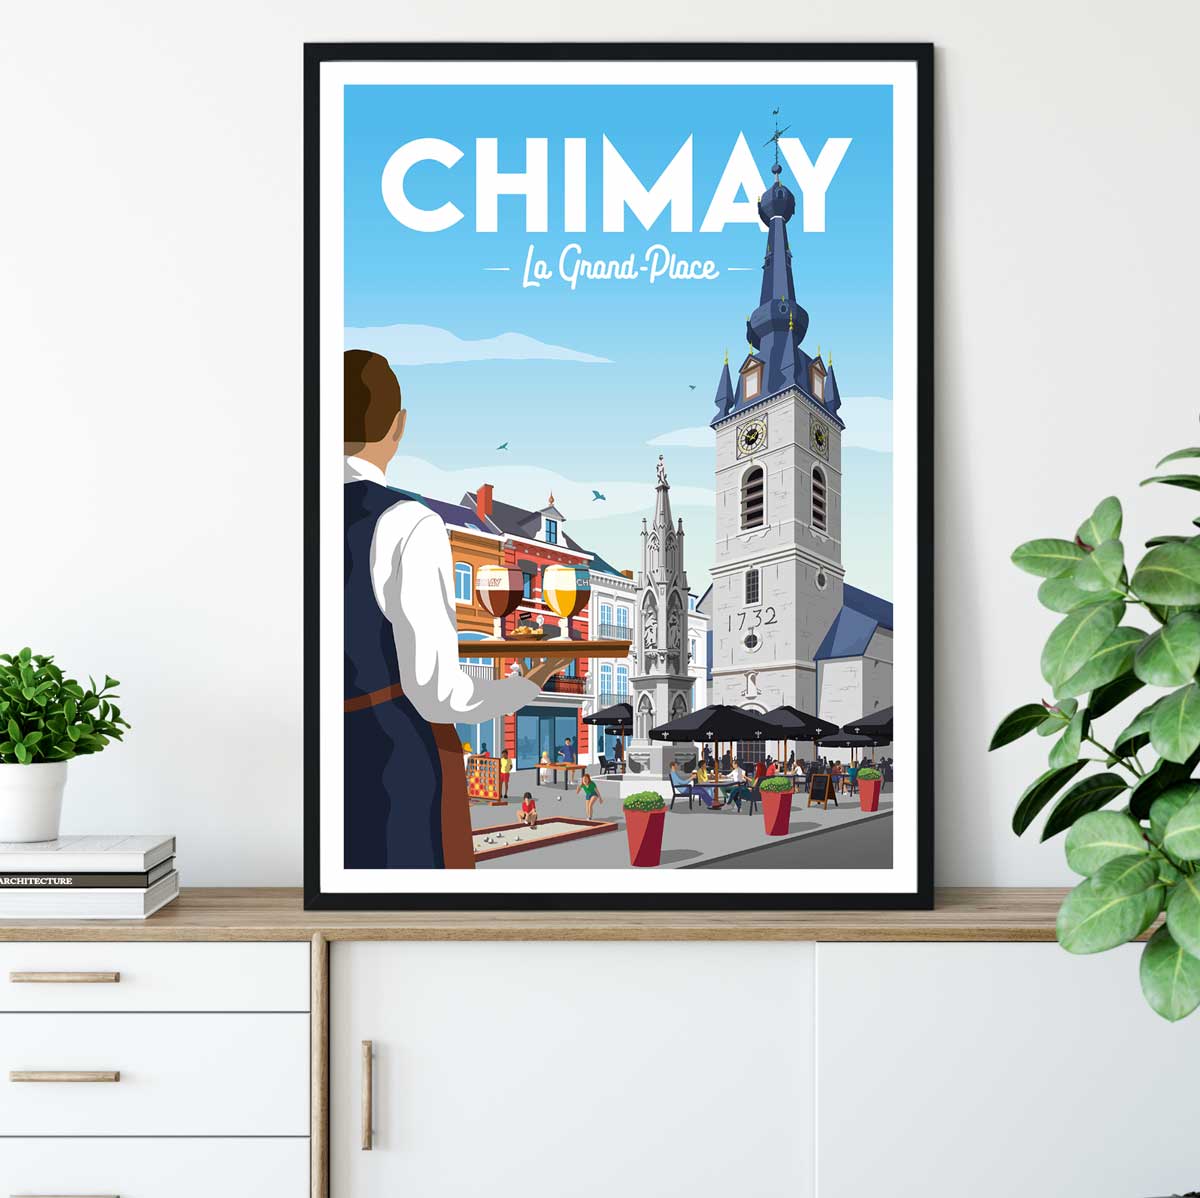 Chimay "La Grand Place" poster